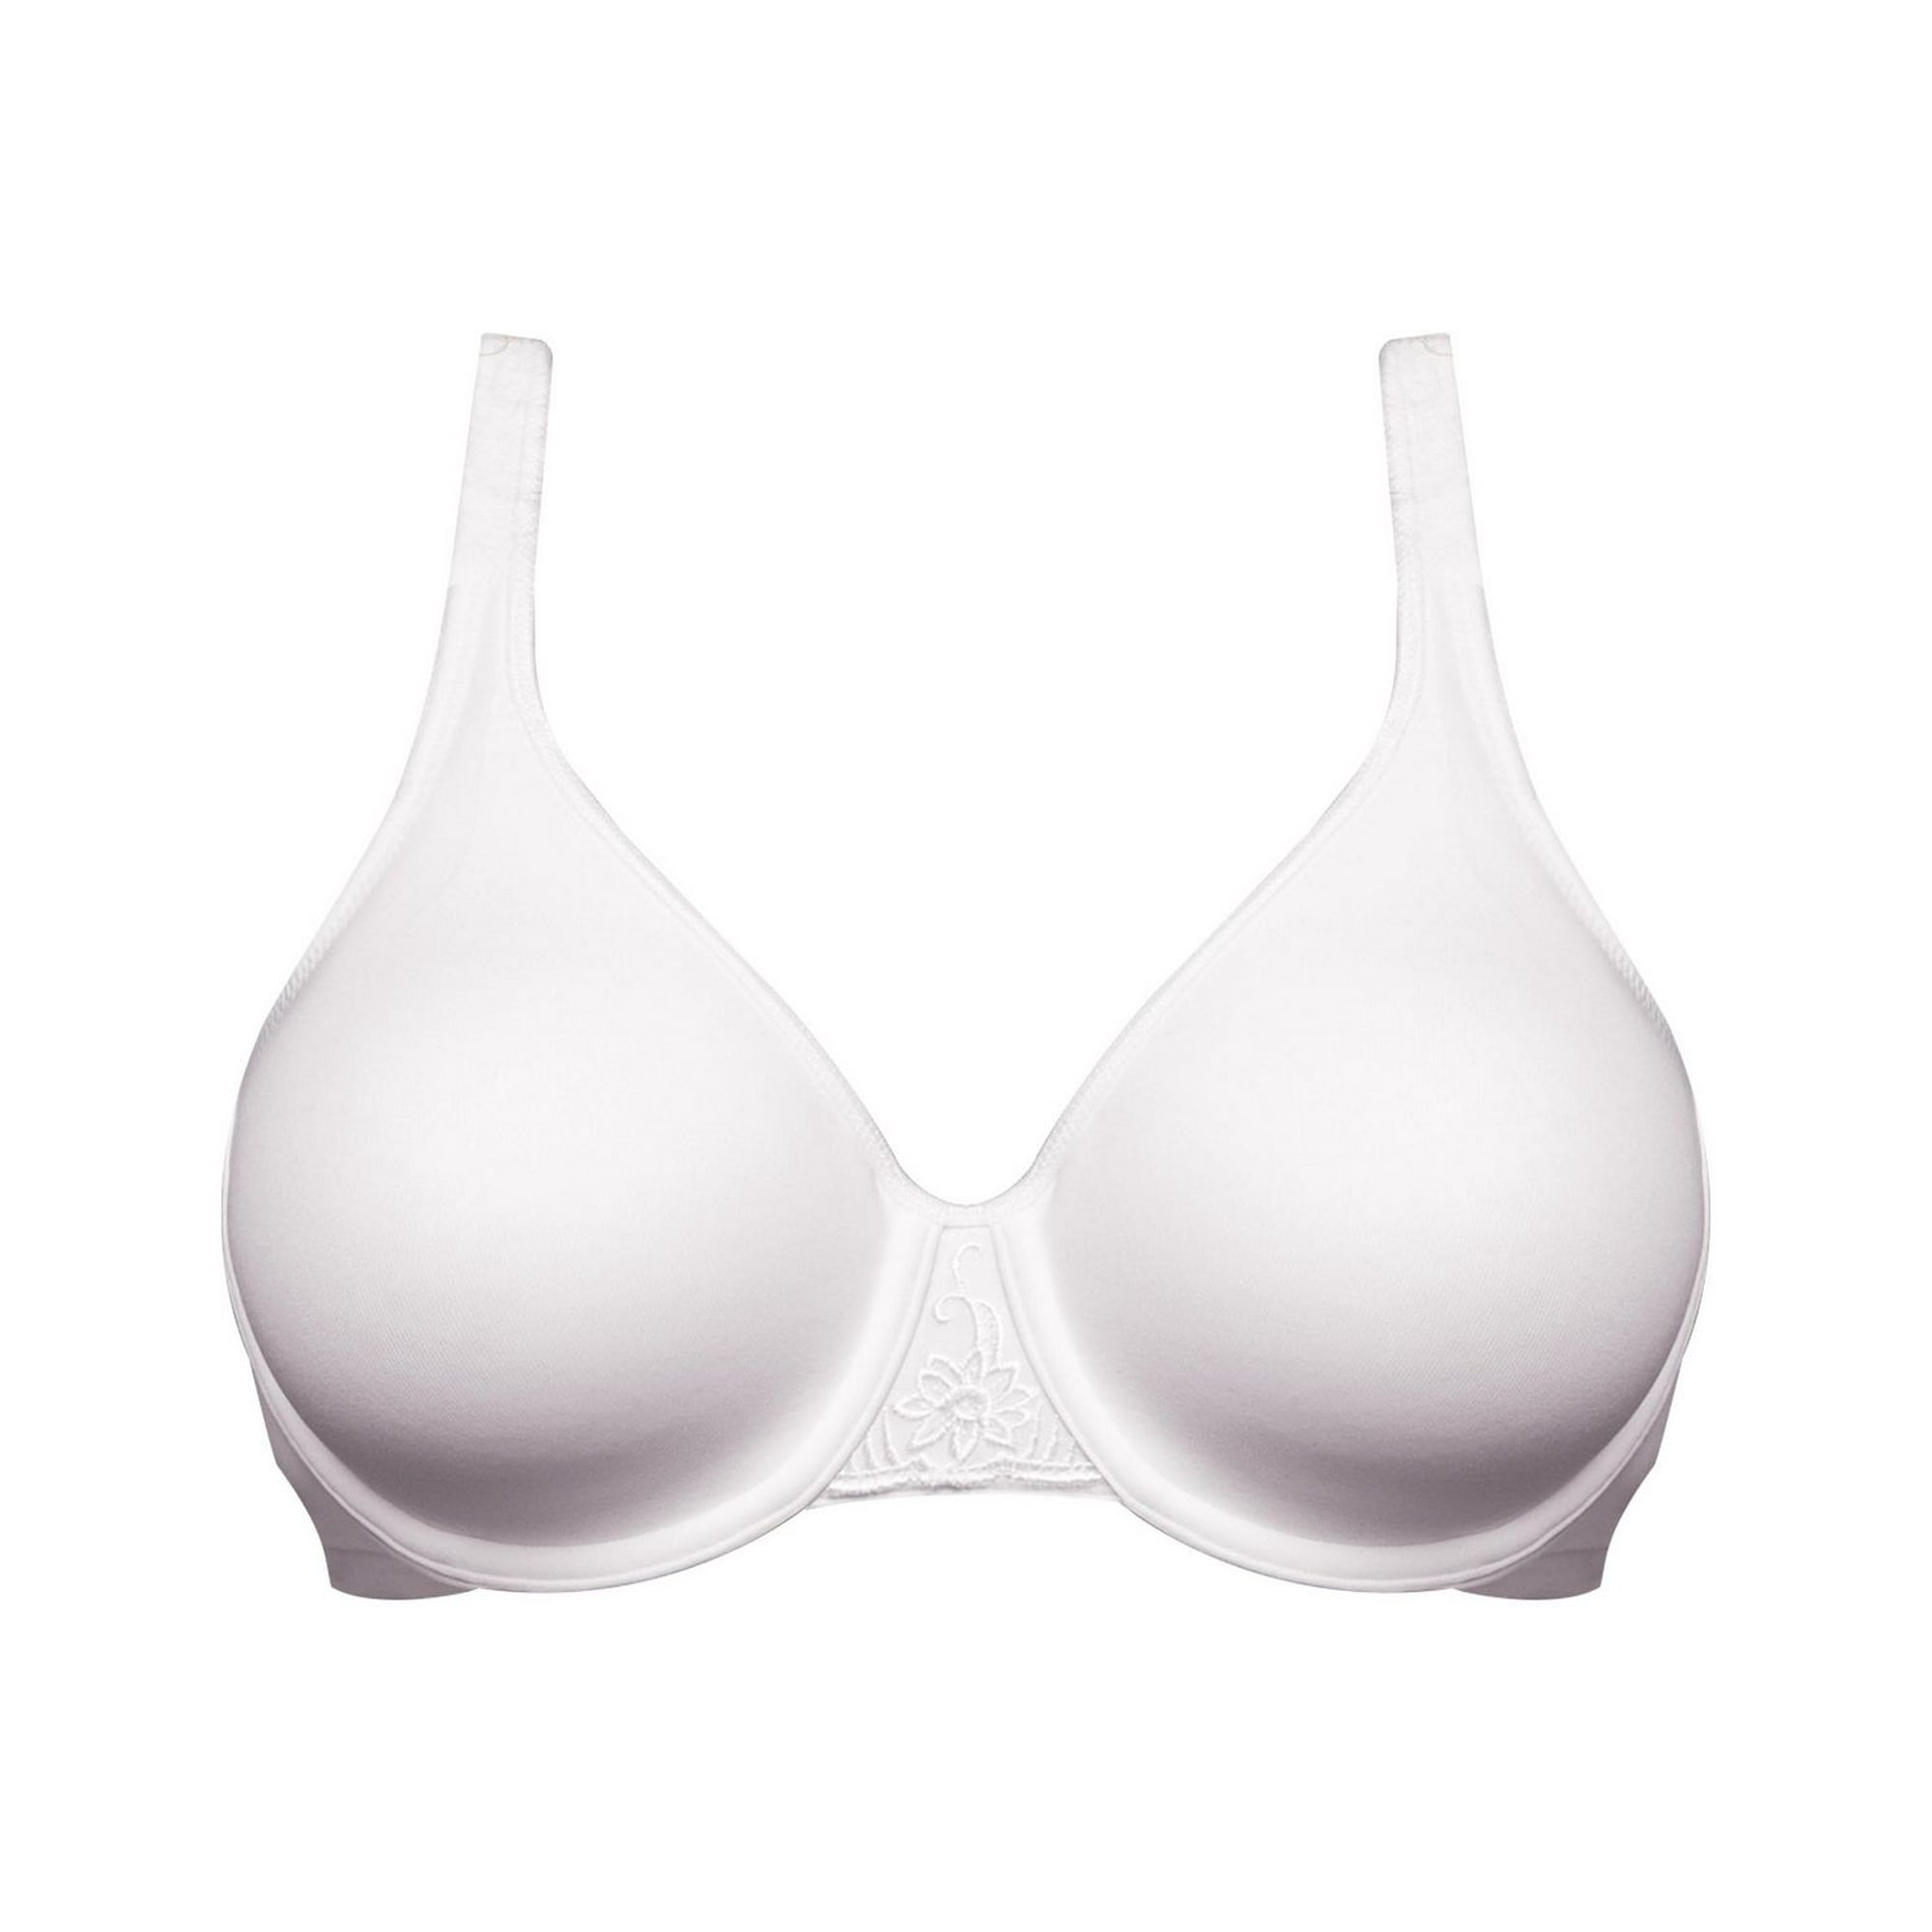 Exquisite Form Fully Full Coverage Wire Free Bra #9671094 (1 unit